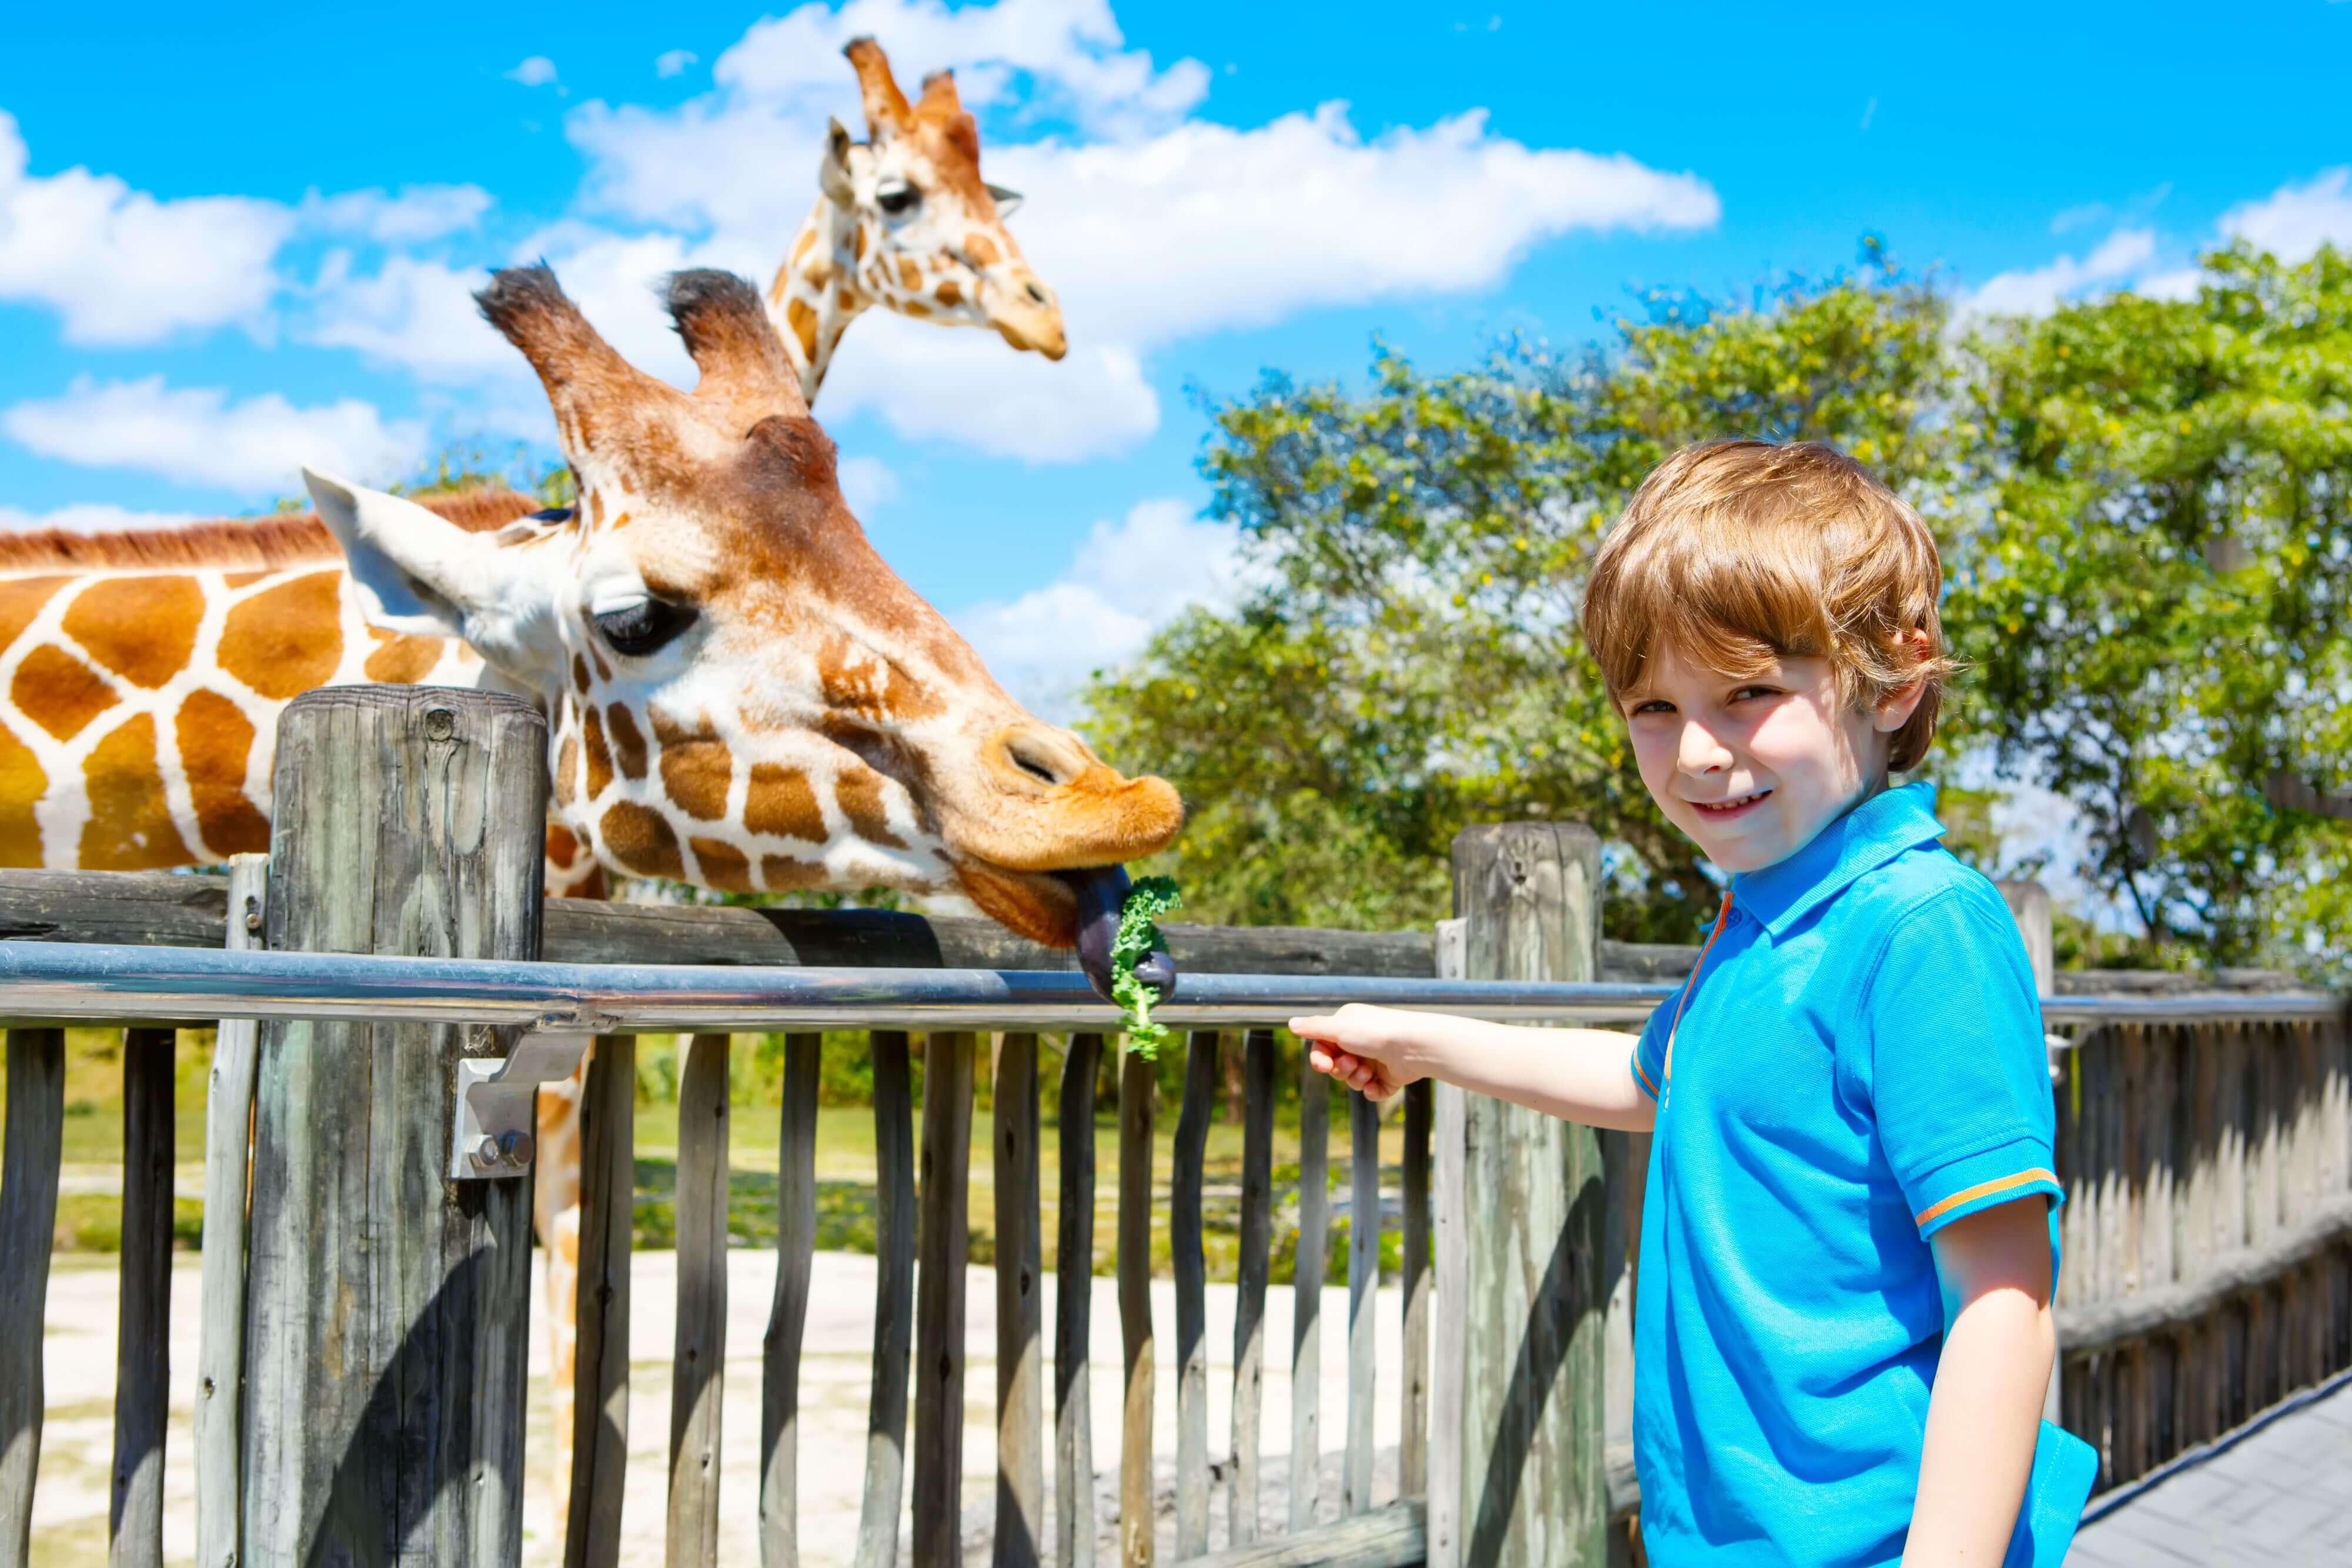 A boy smiles and feeds a giraffe at the zoo.